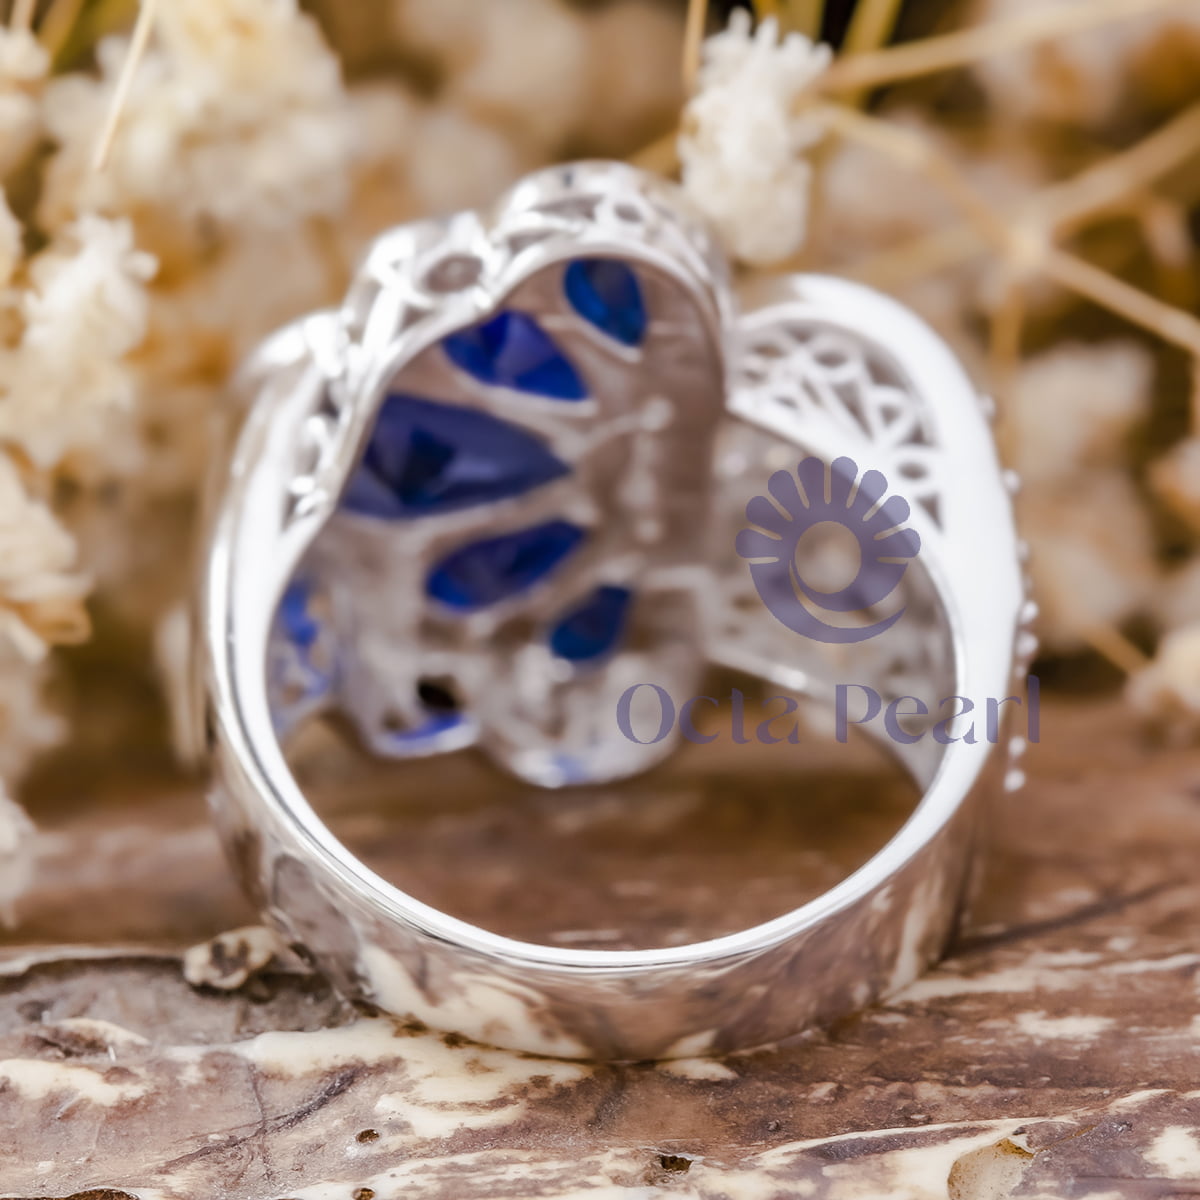 Blue Sapphire Victorian Peacock Feather Ring